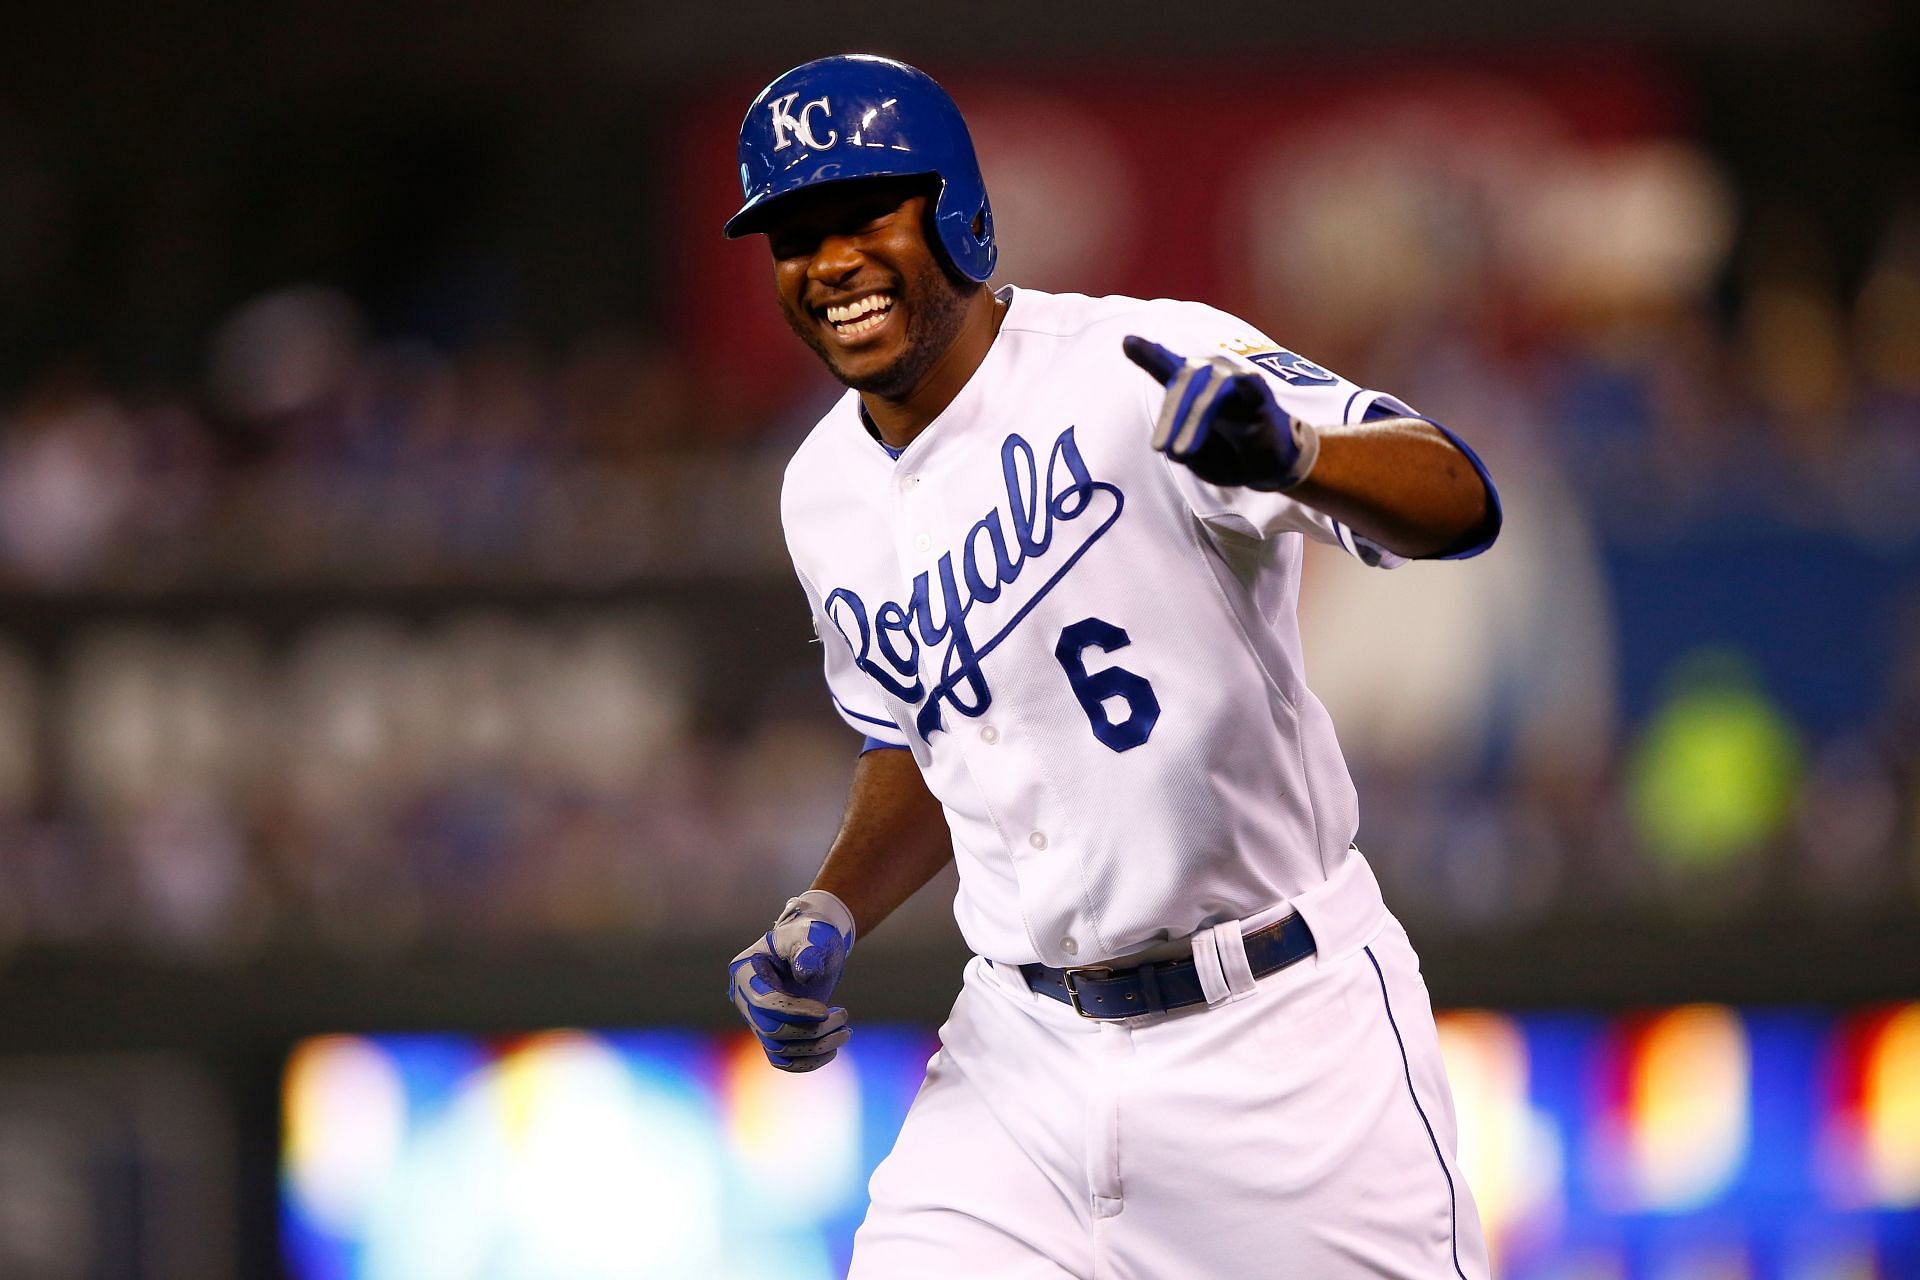 Report: Former Royals fan favorite Lorenzo Cain to return to KC to